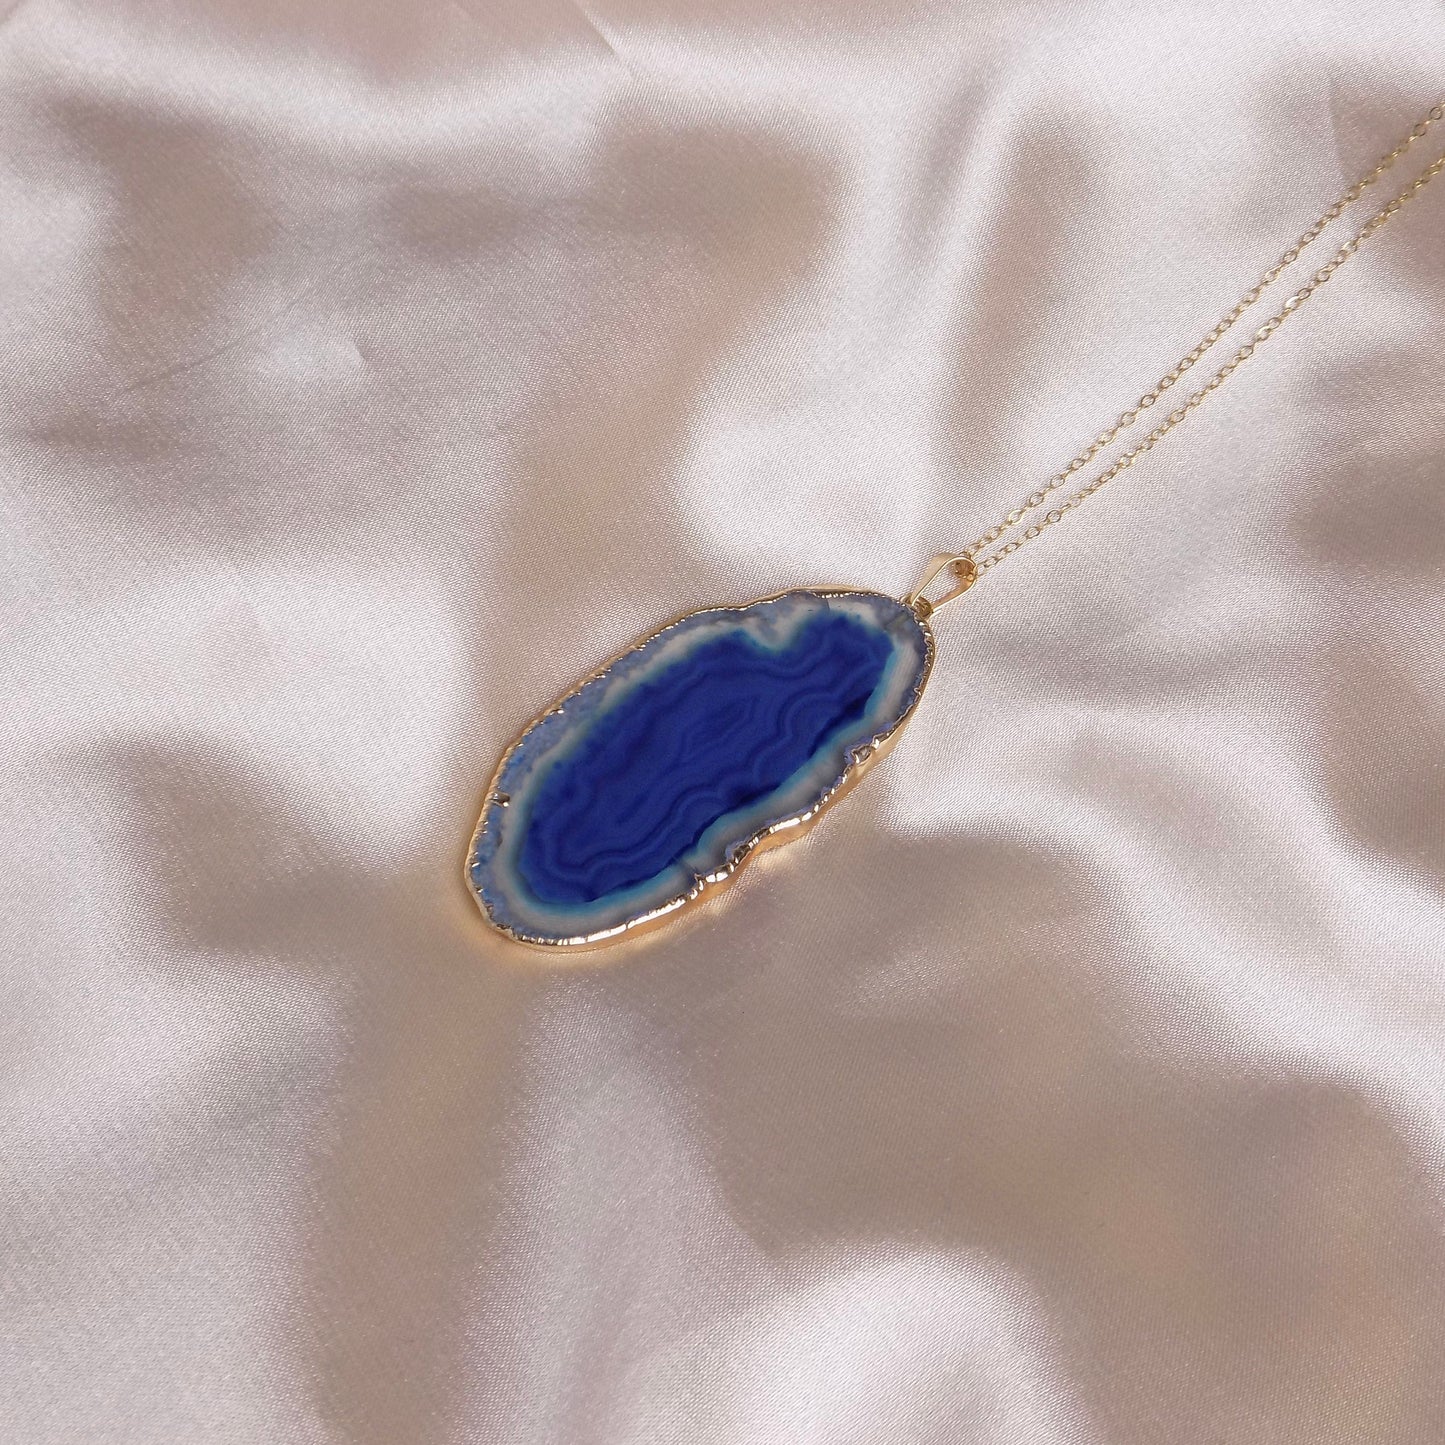 Boho Blue Agate Necklace Gold, Long Slice Geode Pendant, Statement Jewelry For Women, G15-97